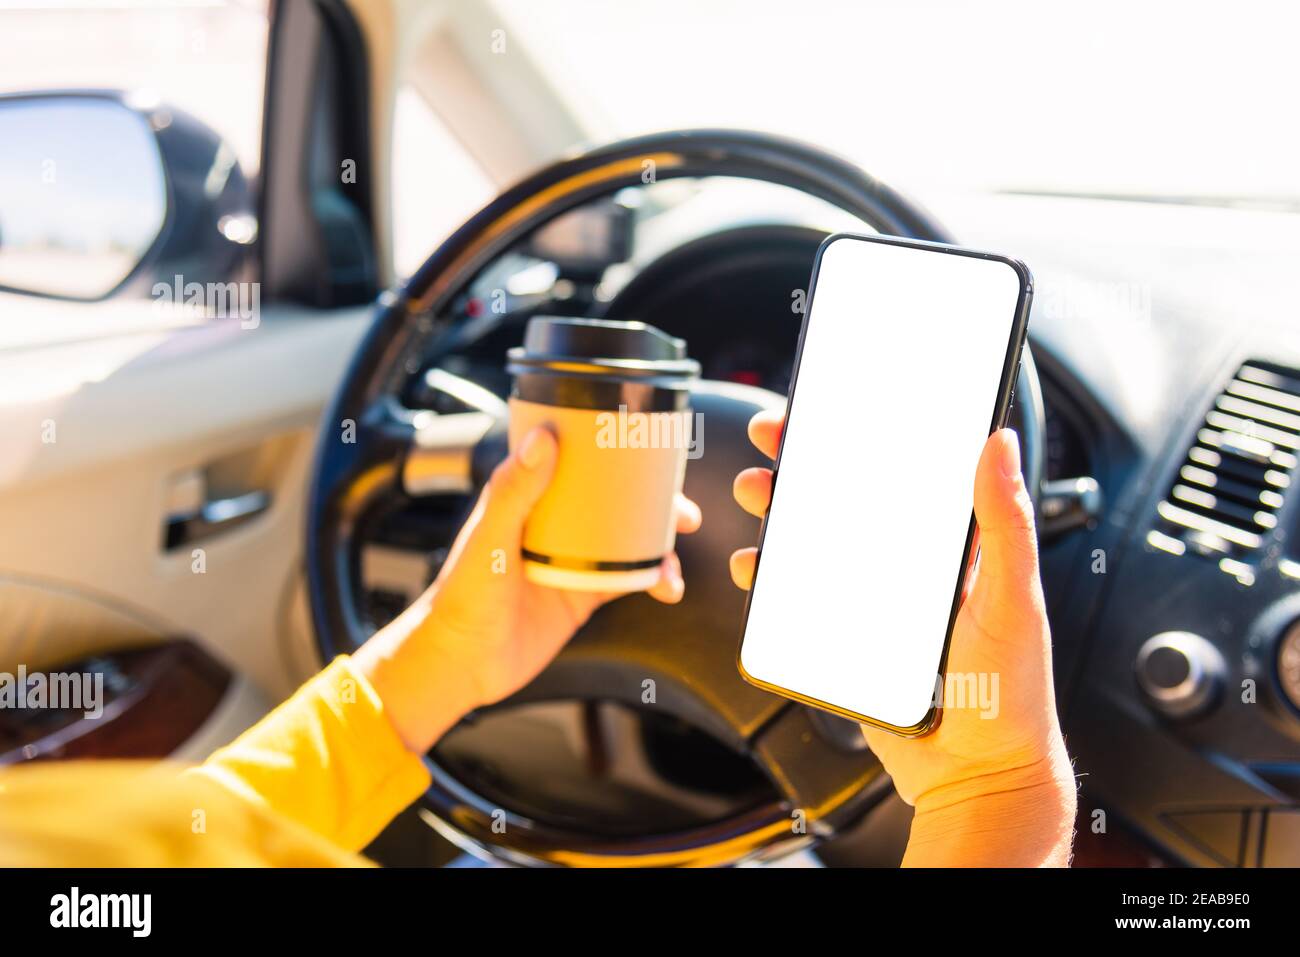 Asian woman drinking hot coffee takeaway cup inside a car and using smartphone blank screen while driving the car in the morning during going to work Stock Photo